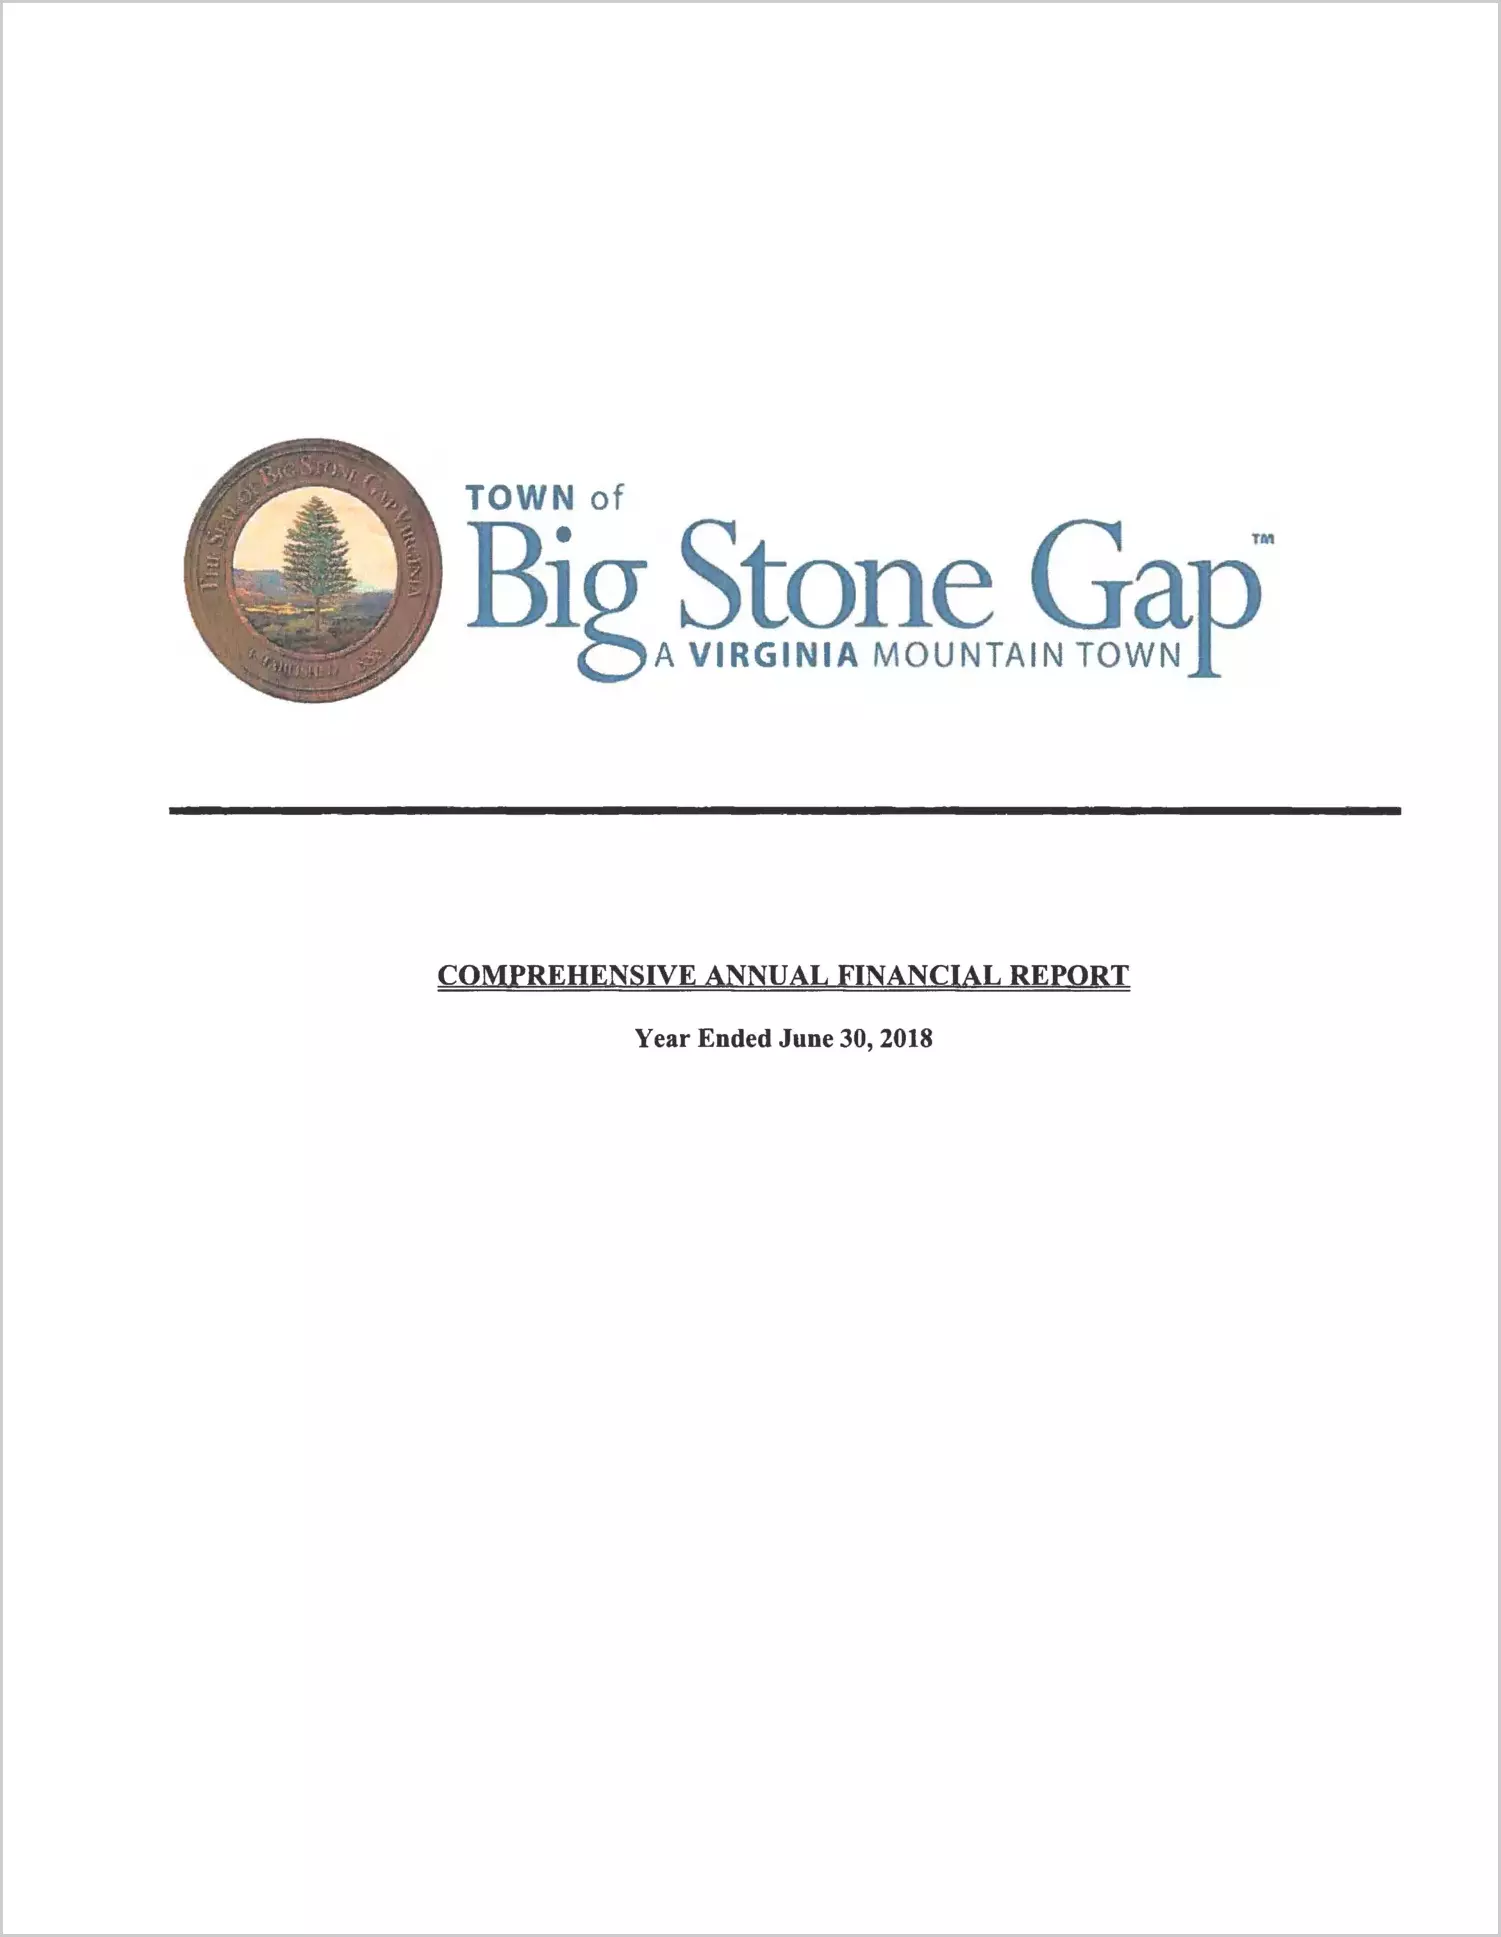 2018 Annual Financial Report for Town of Big Stone Gap